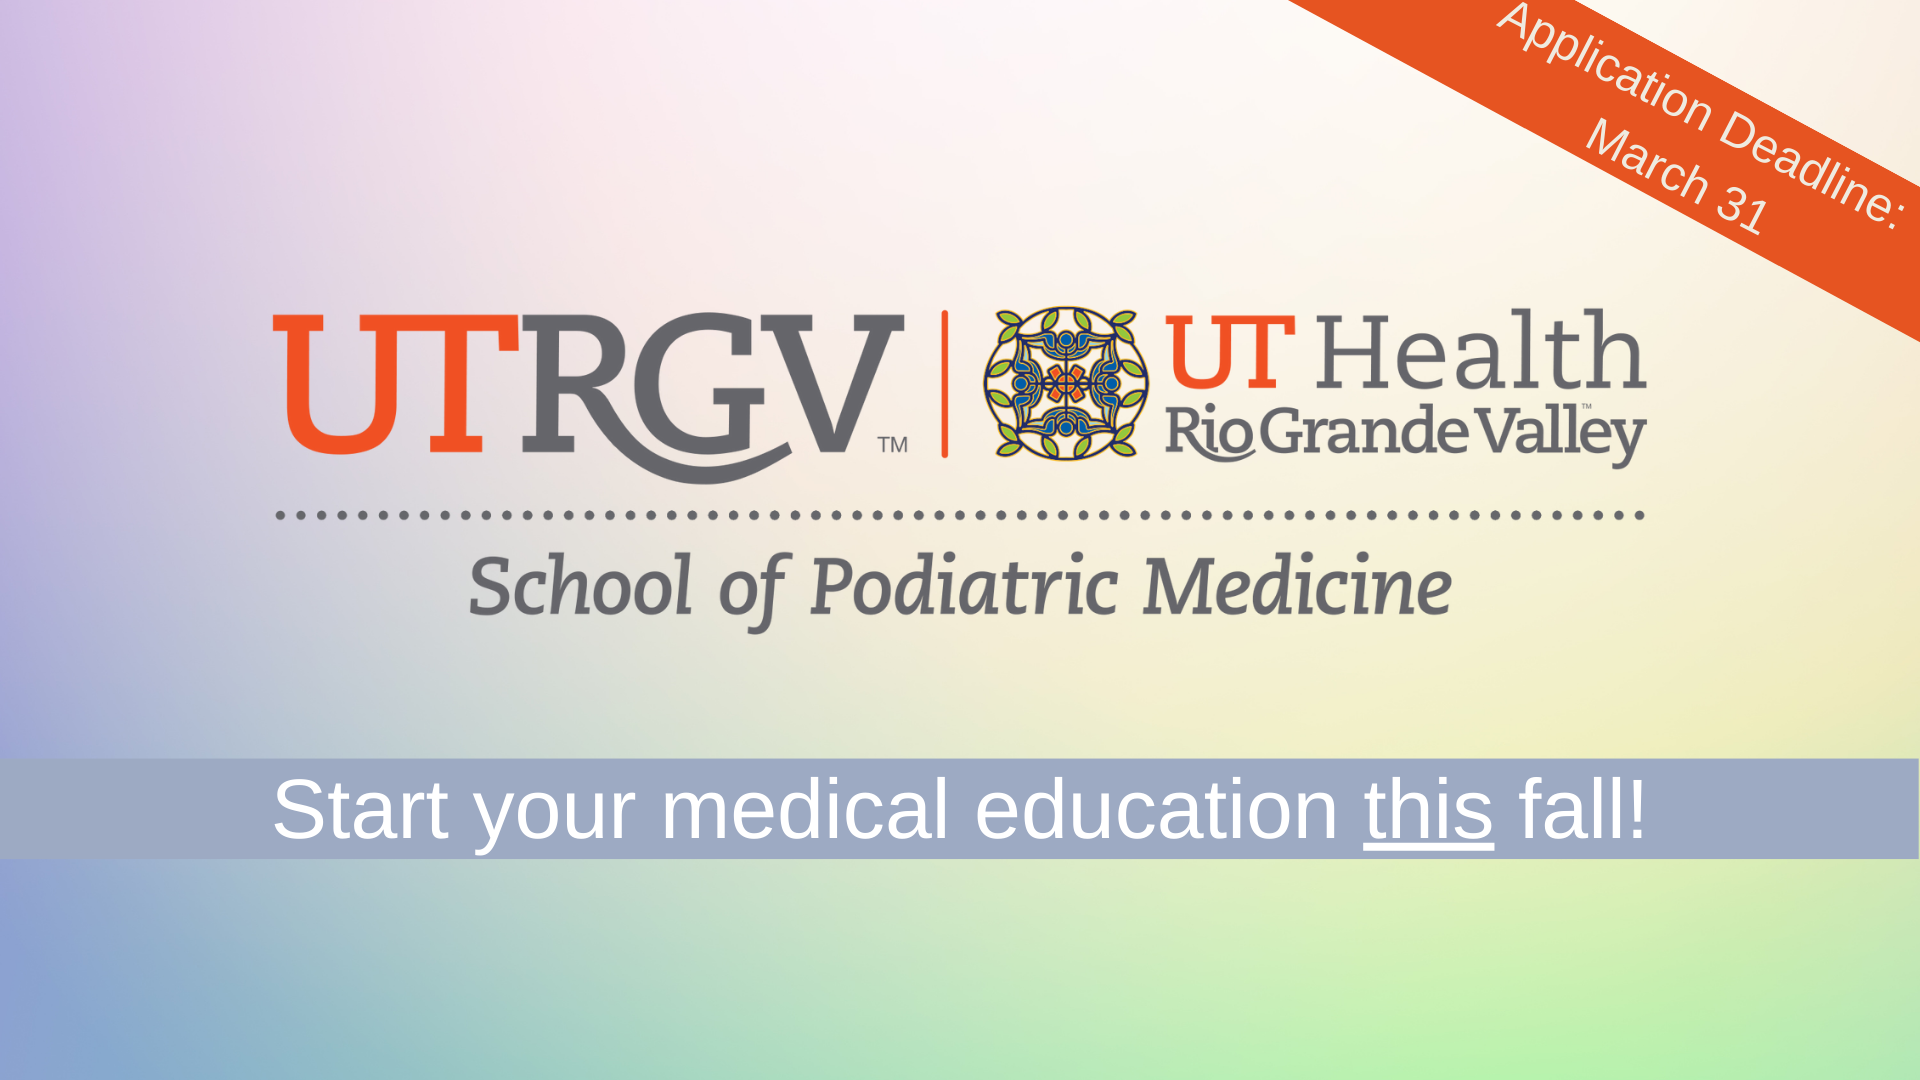 There is Still Time to Apply to The UTRGV School of Podiatric Medicine!